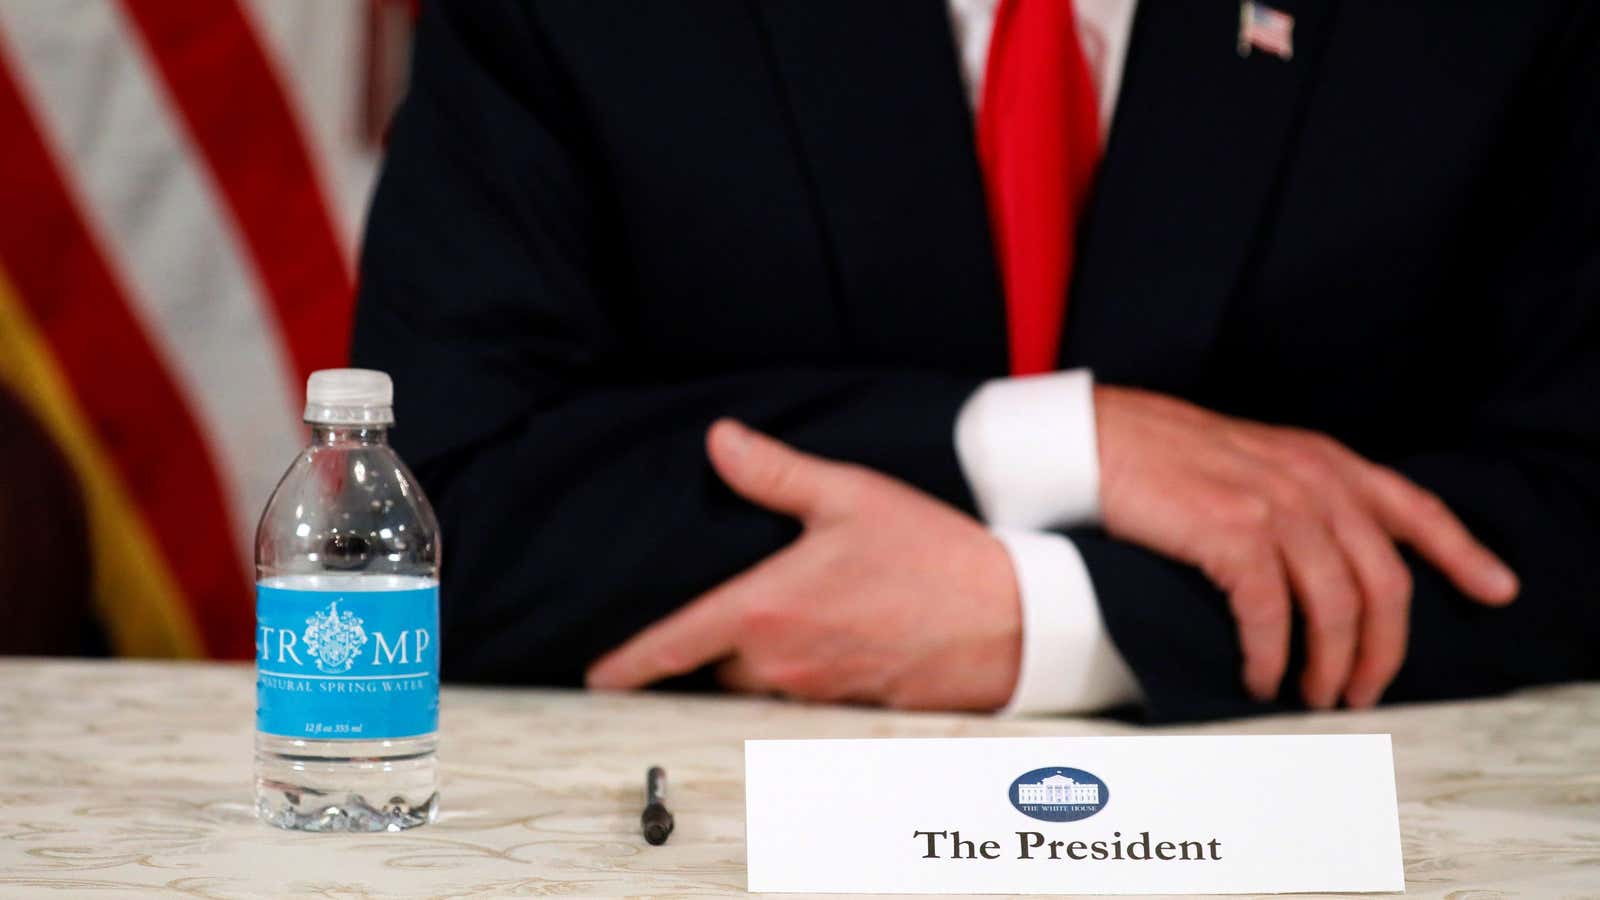 His water comes from the US. Not many of his other products do.